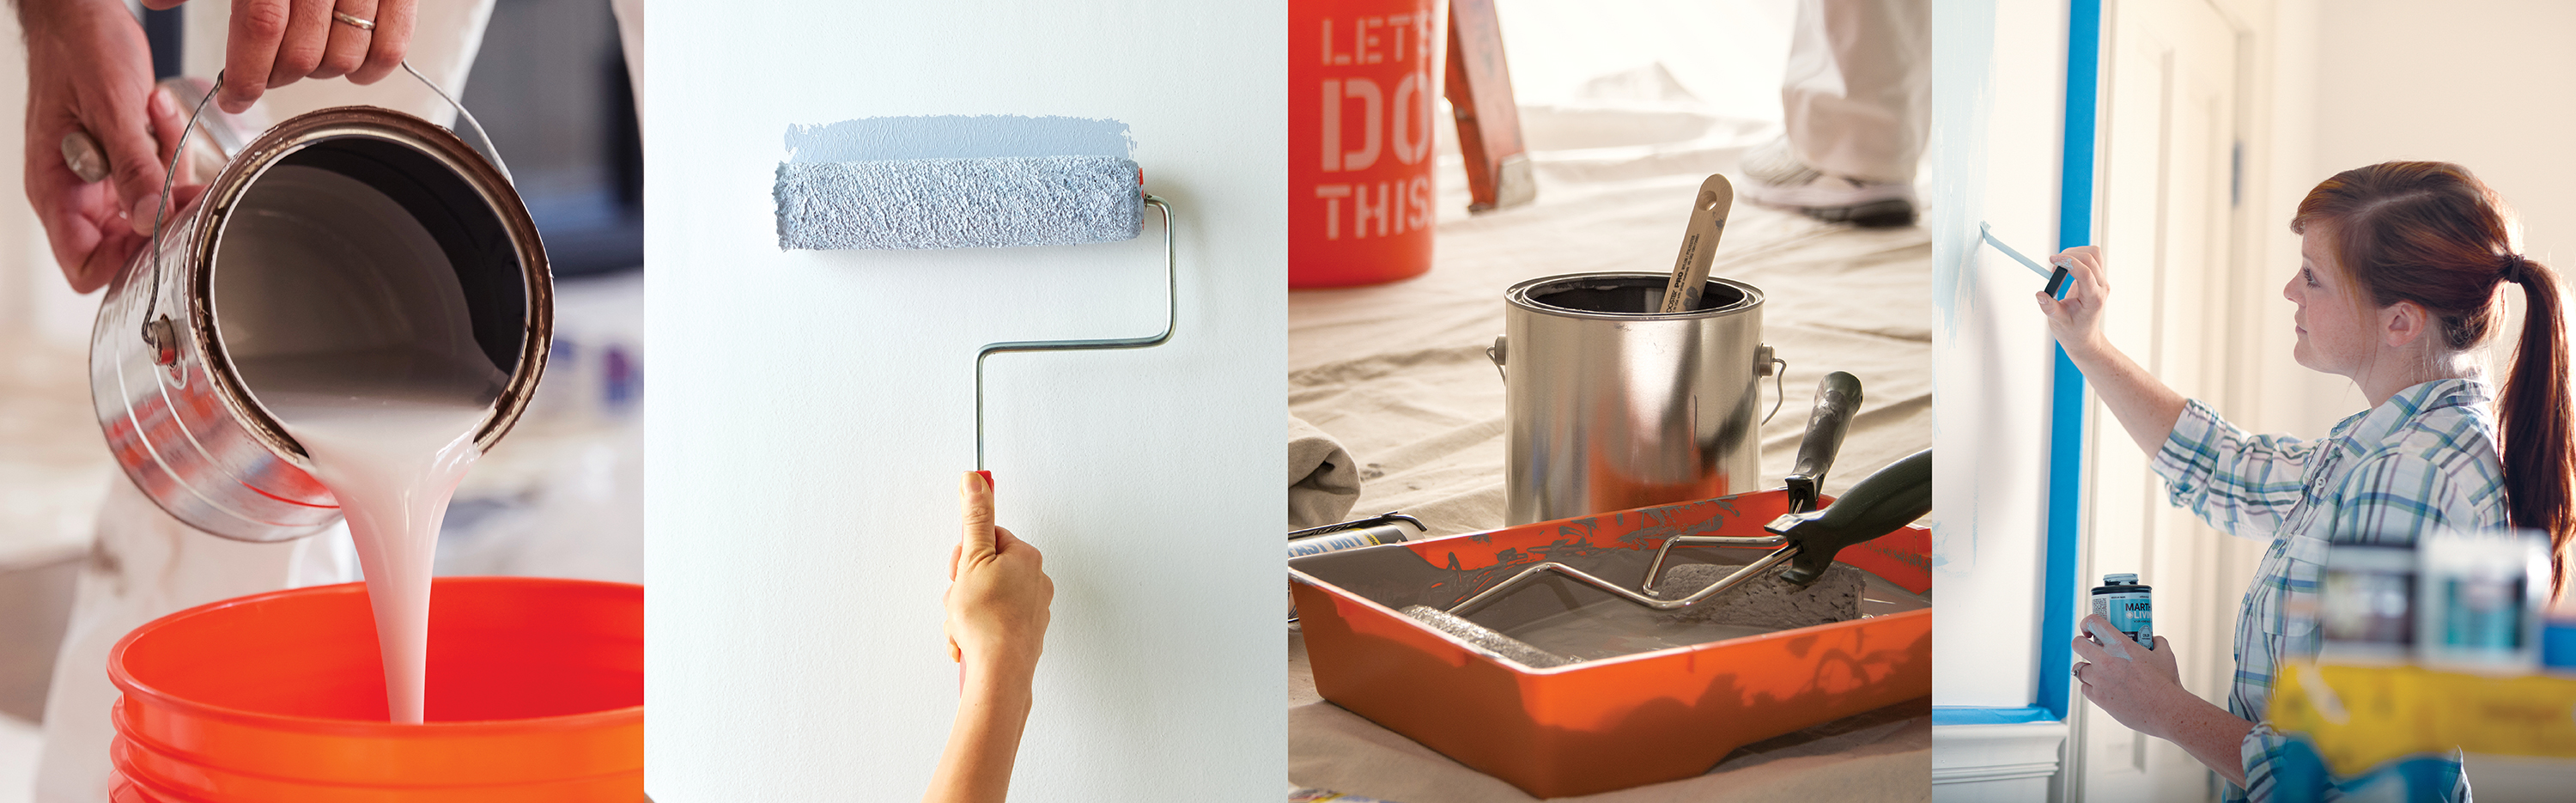 The Home Depot Three Common Paint Mistakes Youre Making And How To Fix Them